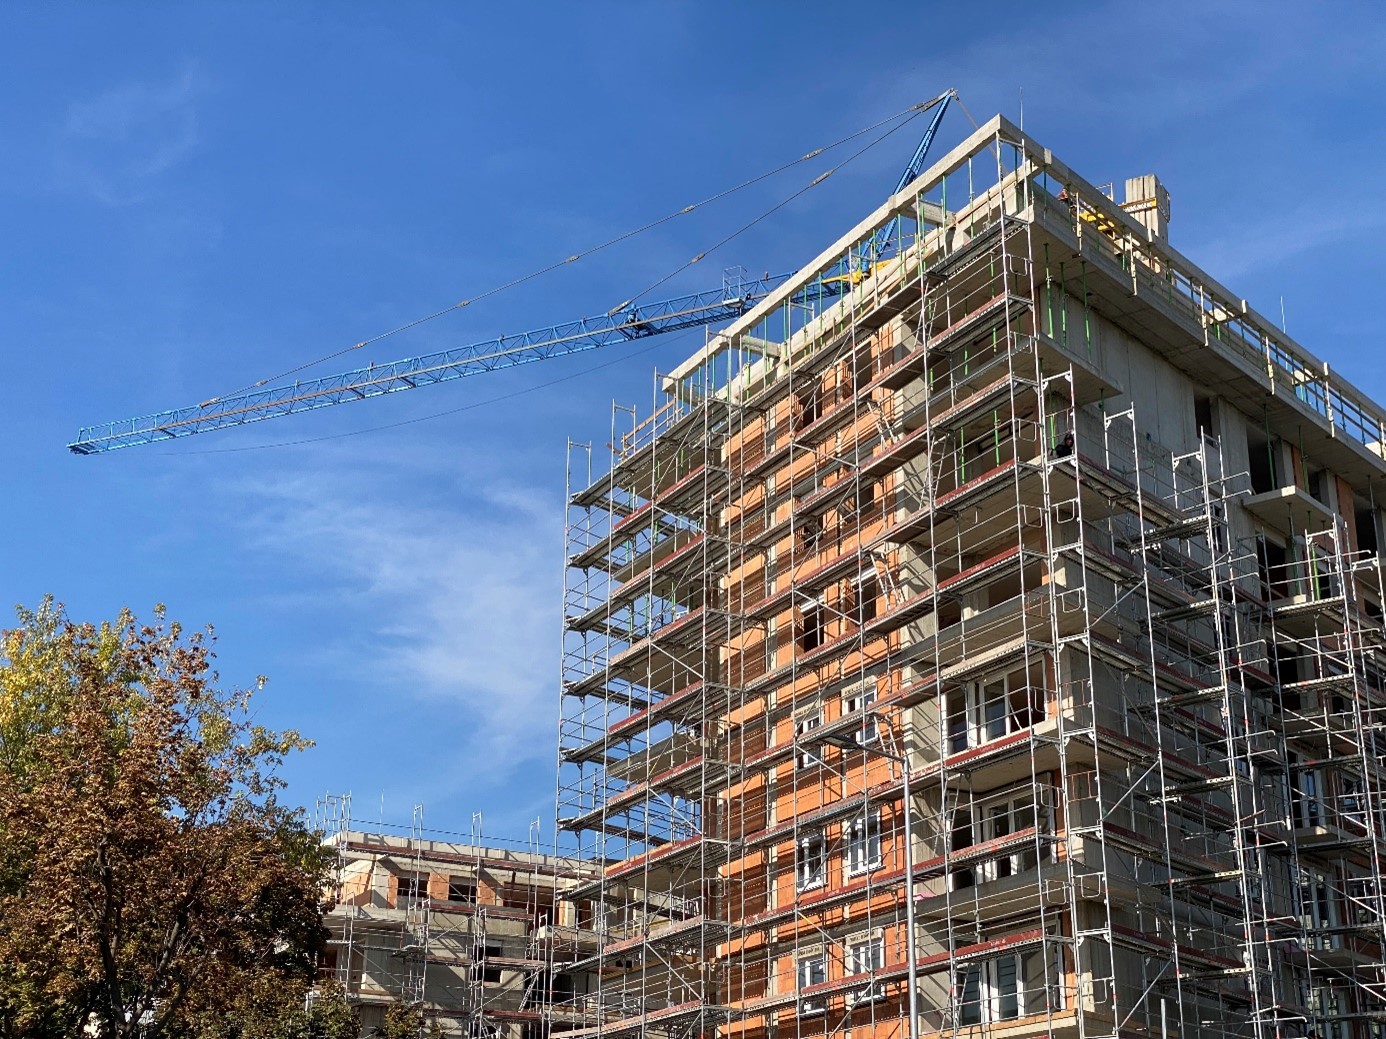 Building structure completed at Kassák Terrace, the third phase of LIVING’s Kassák project